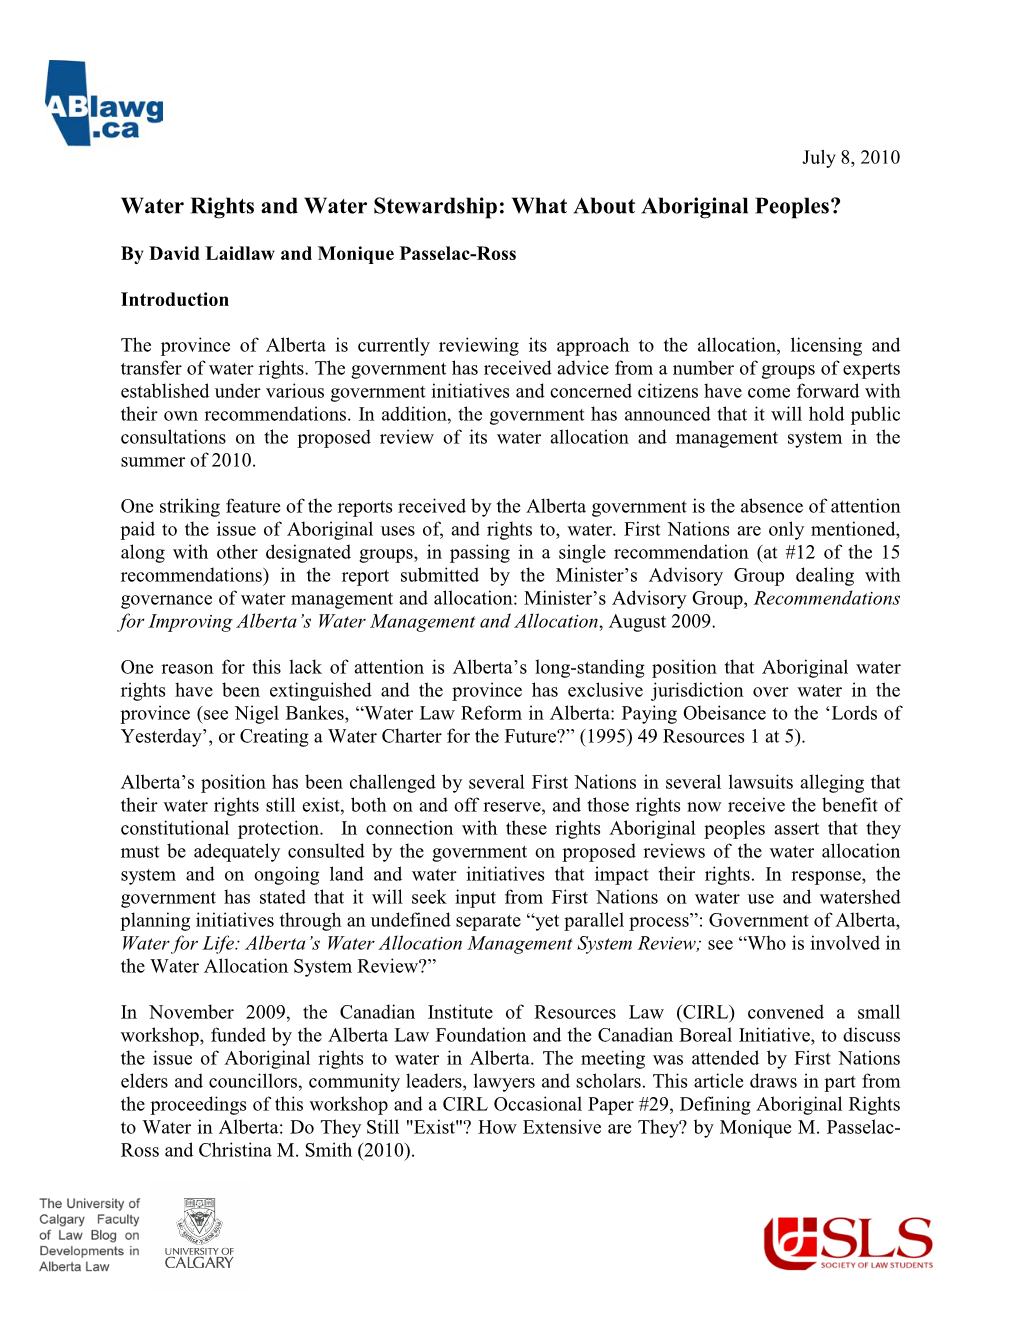 Water Rights and Water Stewardship: What About Aboriginal Peoples?